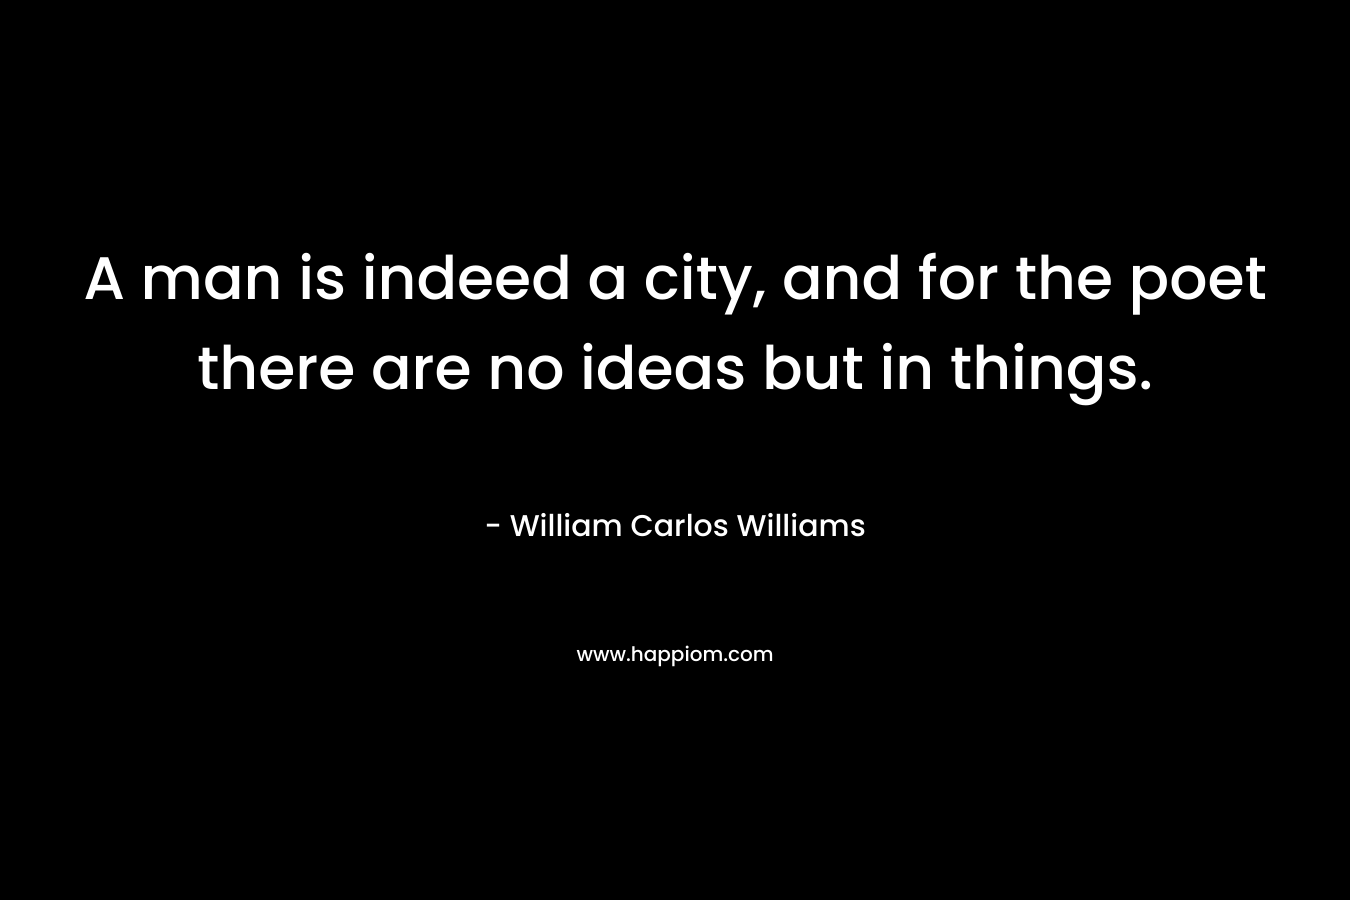 A man is indeed a city, and for the poet there are no ideas but in things. – William Carlos Williams